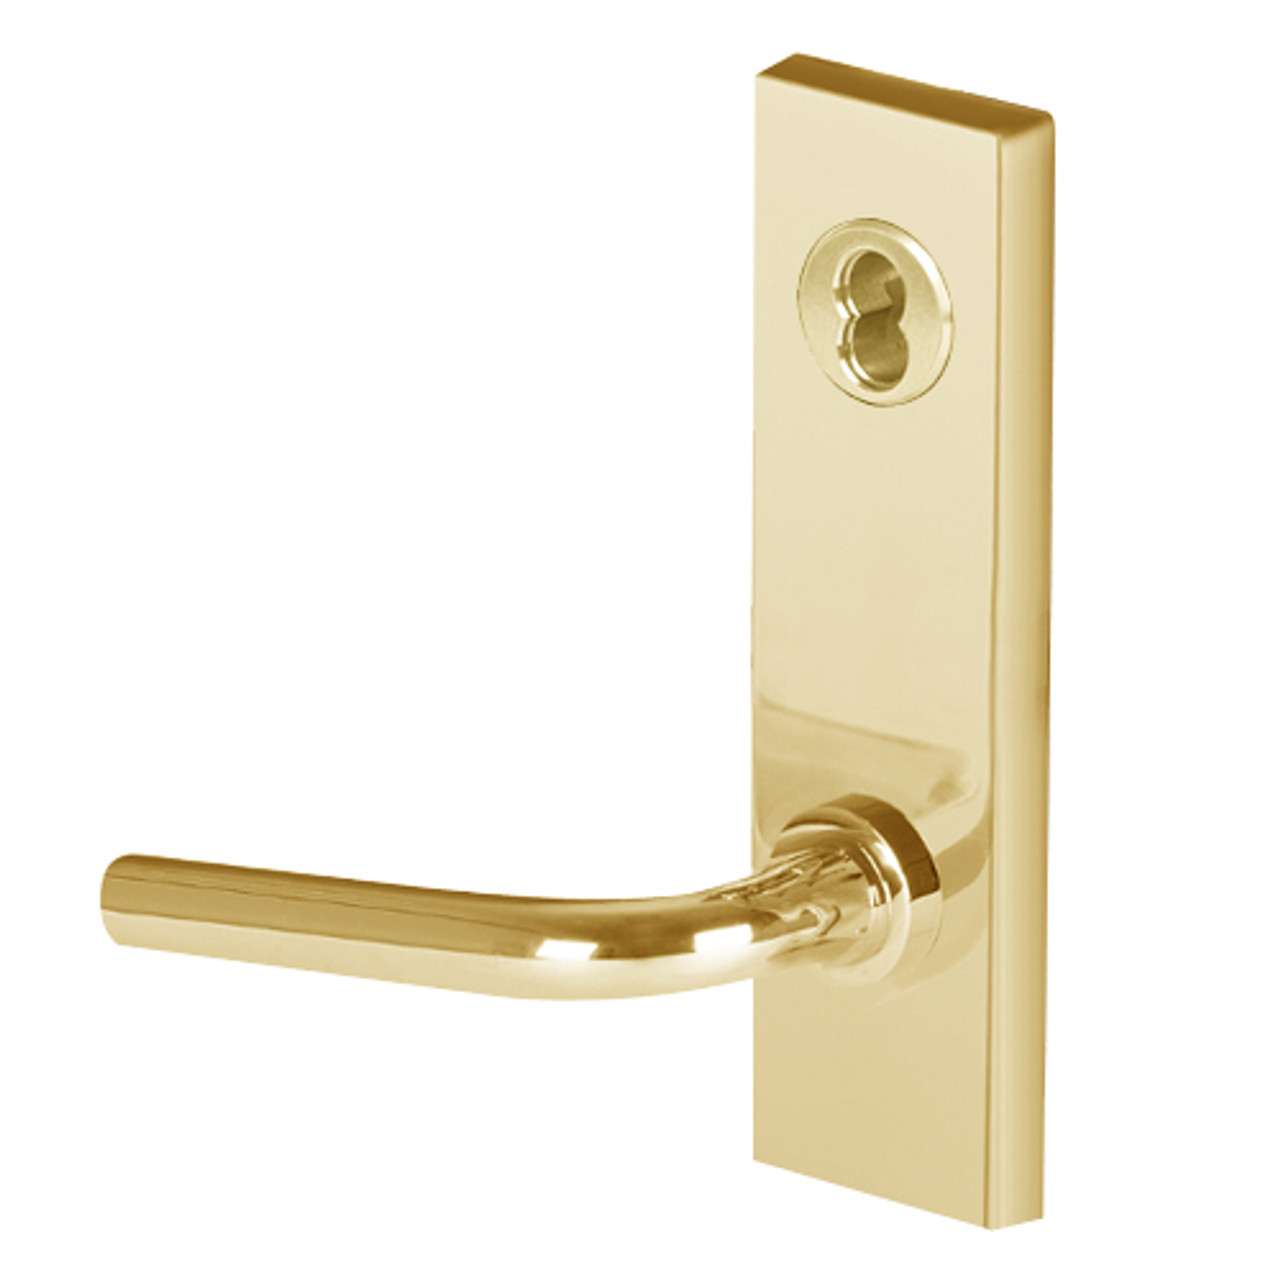 45HW7TWEL12M605 Best 40HW series Double Key Deadbolt Fail Safe Electromechanical Mortise Lever Lock with Solid Tube w/ No Return Style in Bright Brass